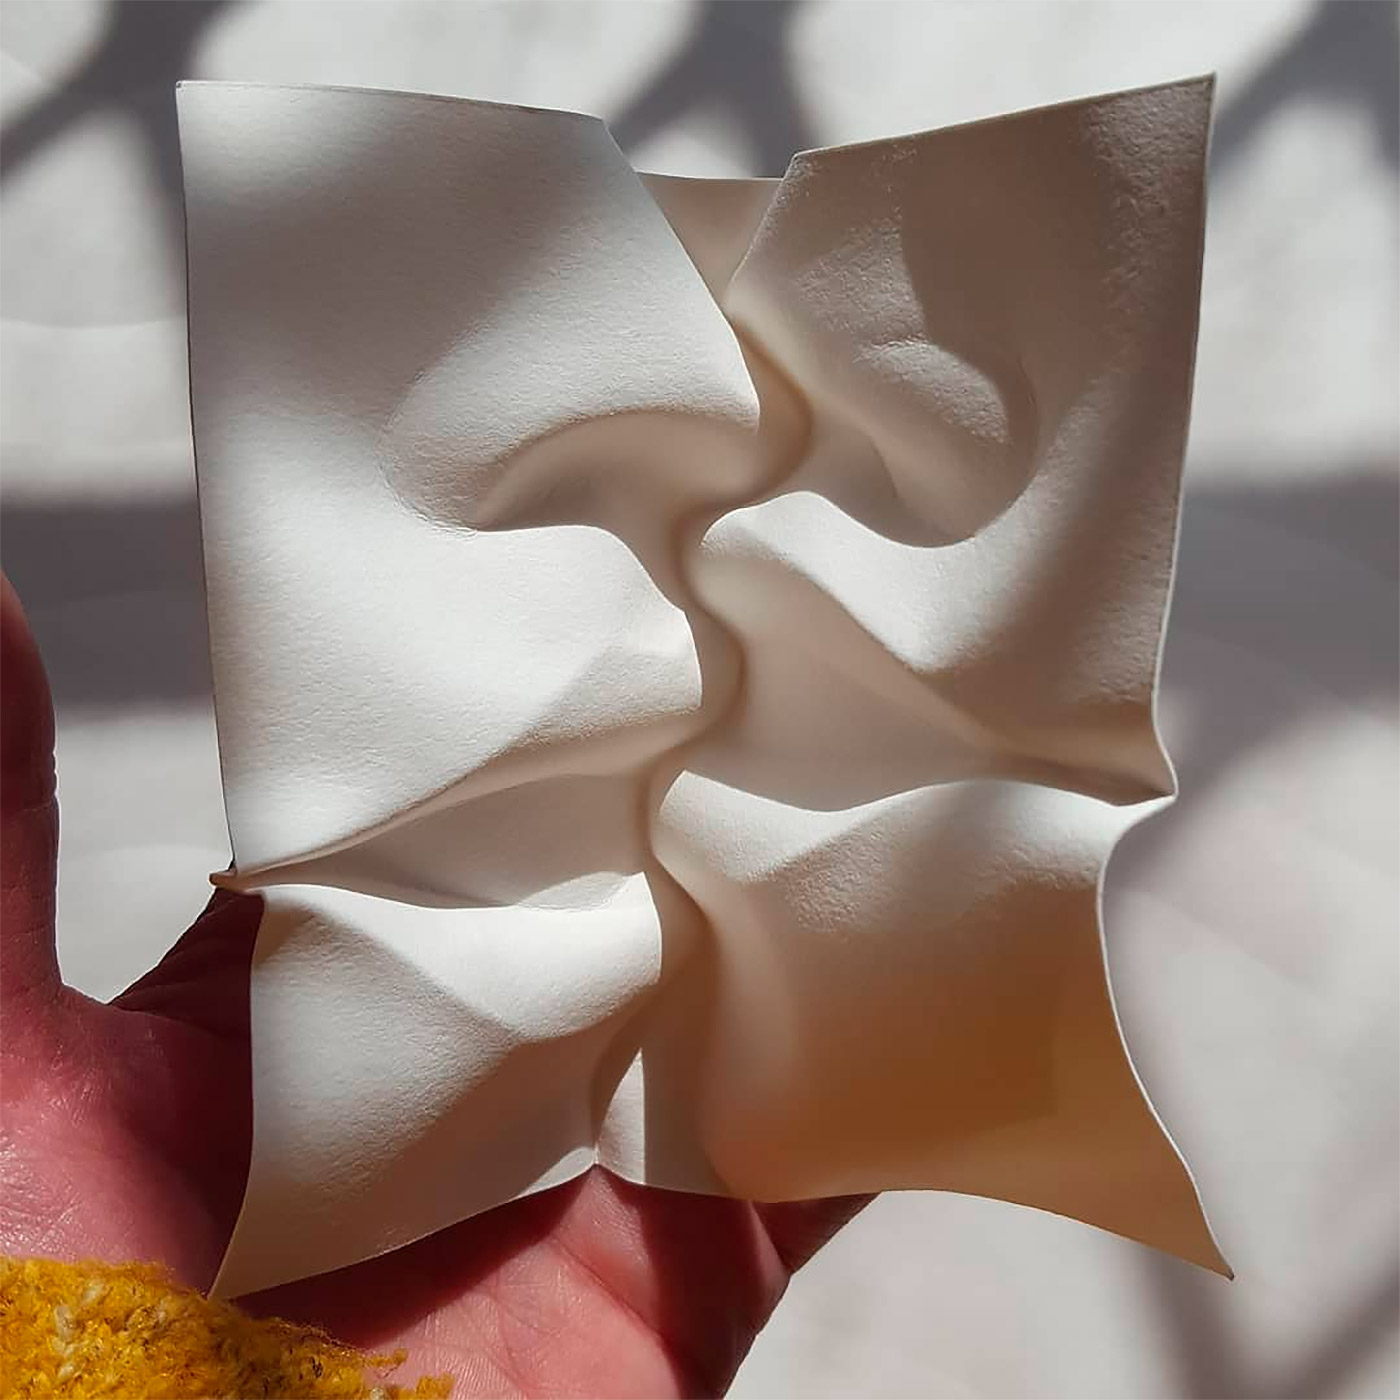 Wet Folded Paper Sculptures By Polly Verity Daily Design Inspiration